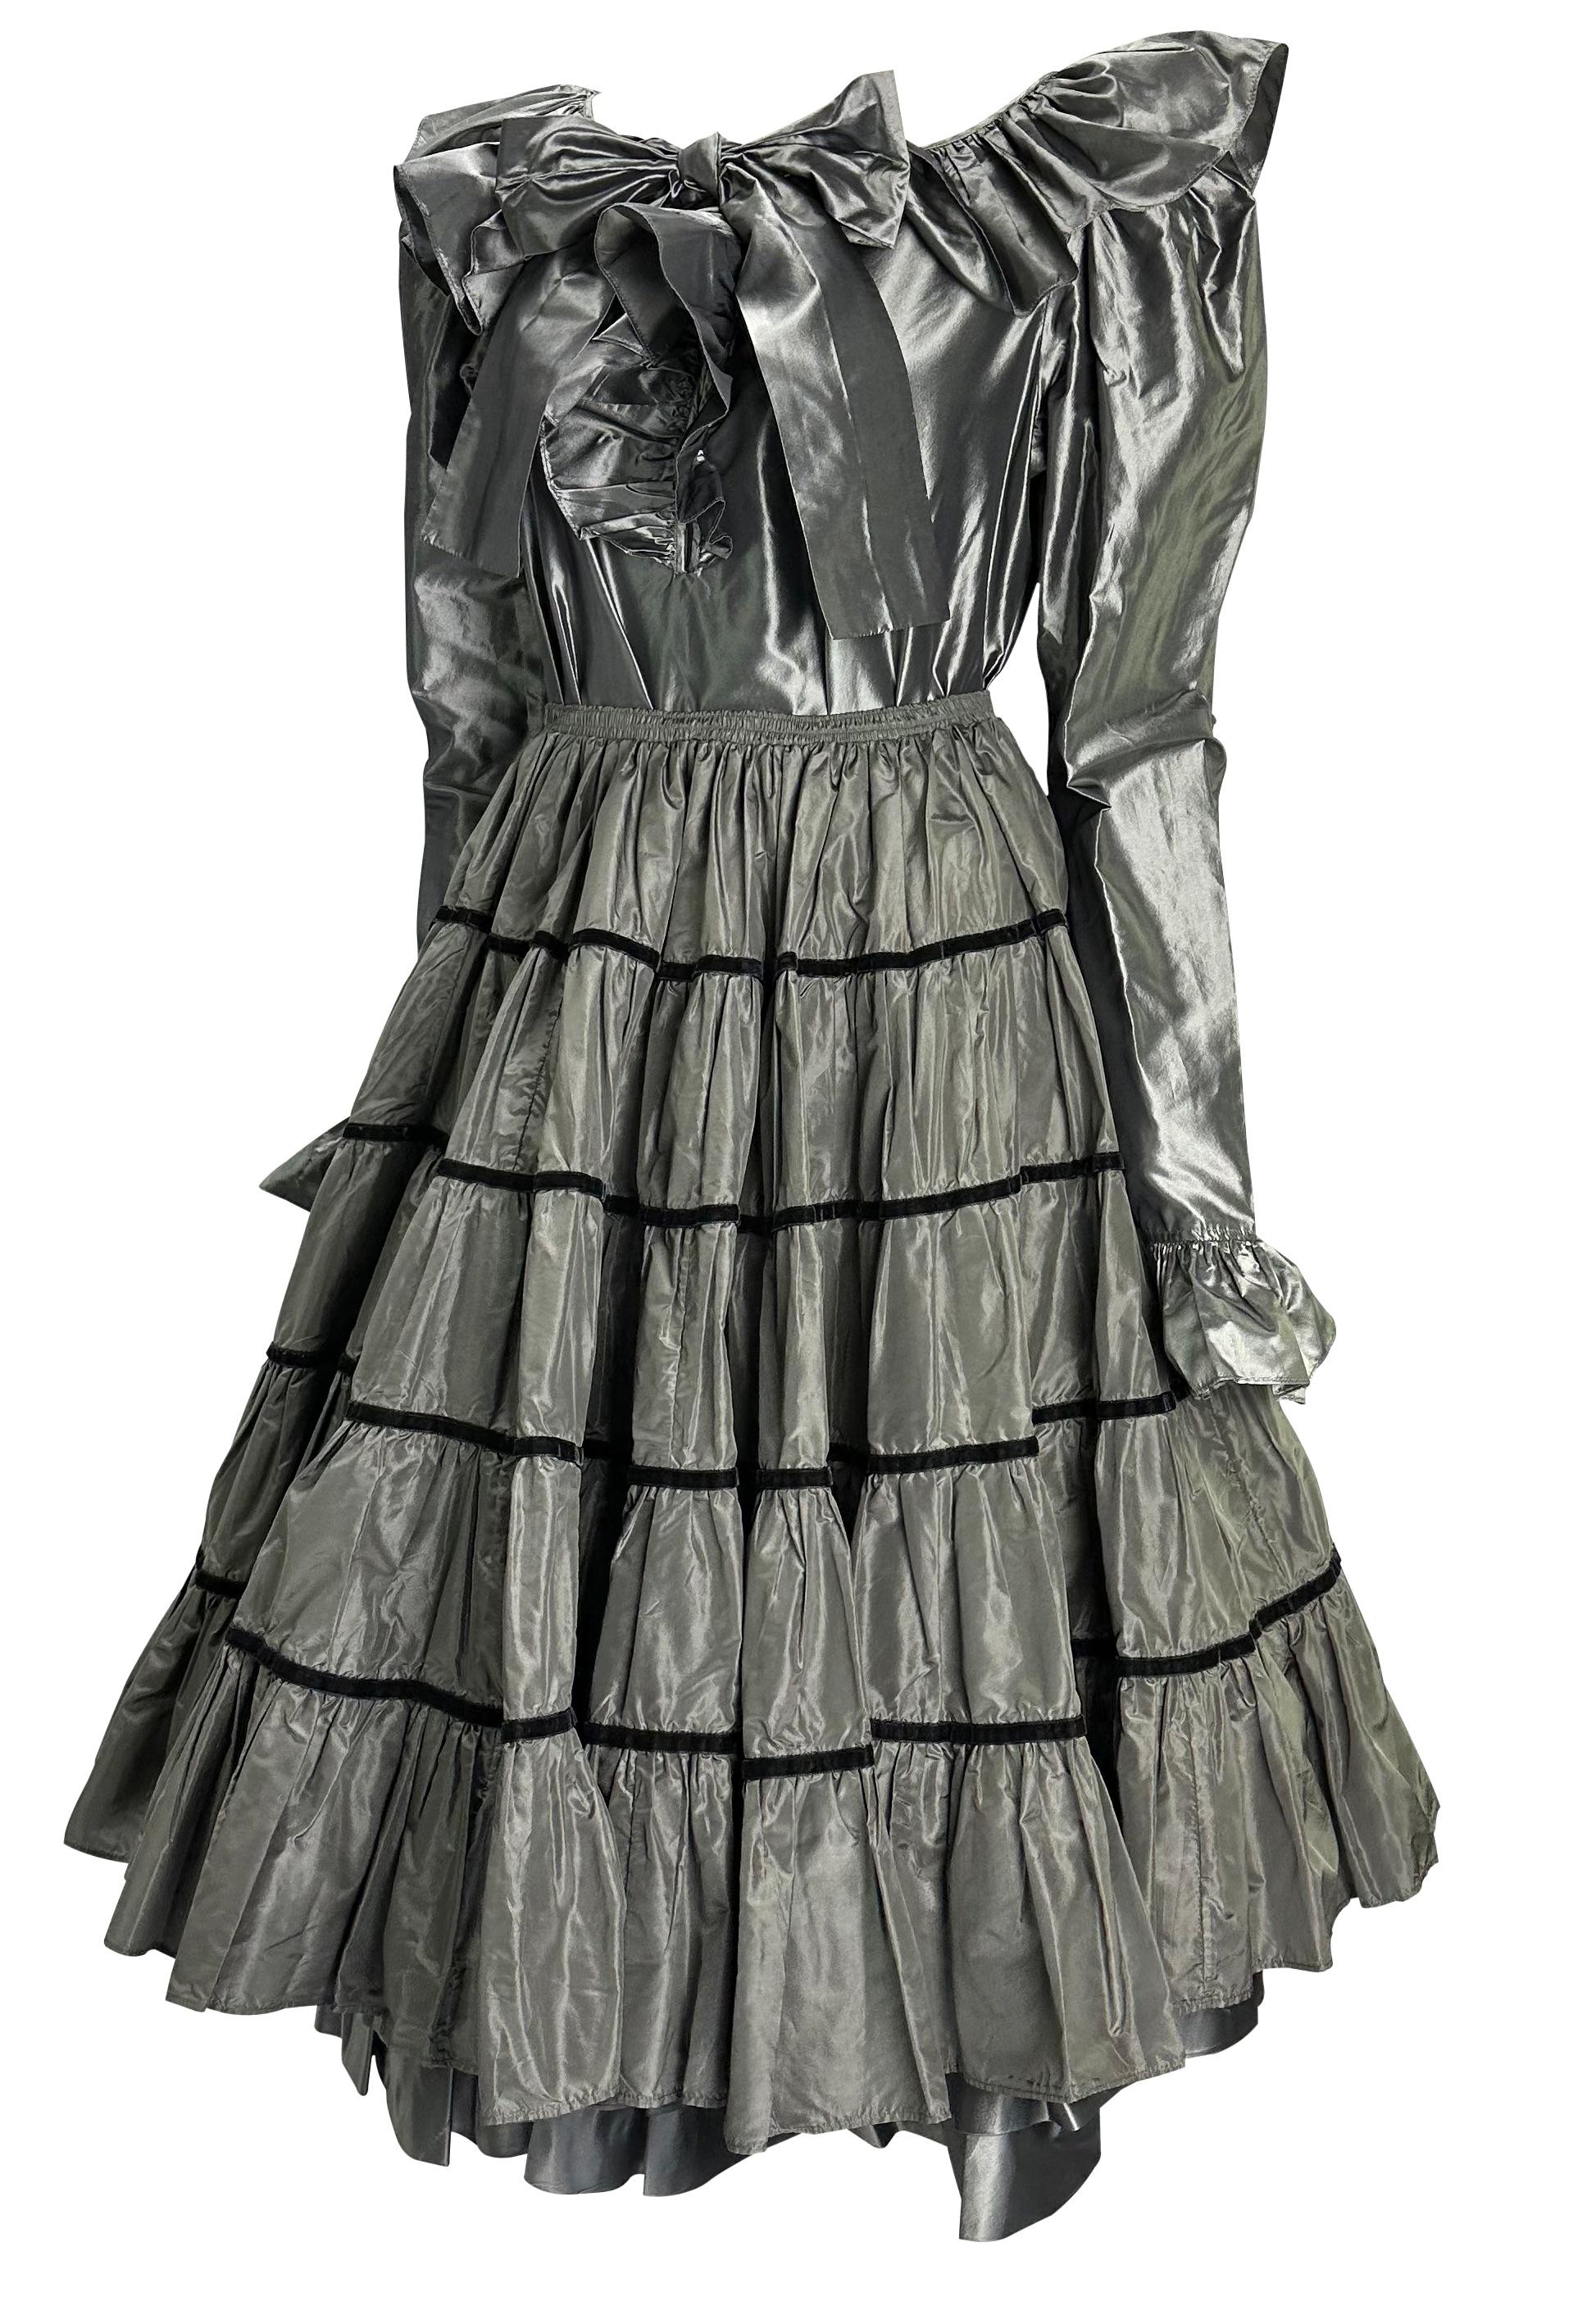 Presenting a gorgeous silver Saint Laurent Rive Gauche three-piece skirt set, designed by Yves Saint Laurent. From the 1980s, this incredible set is made up of three pieces - a silk top, a ruffled underskirt, and a velvet-trimmed exterior skirt. The